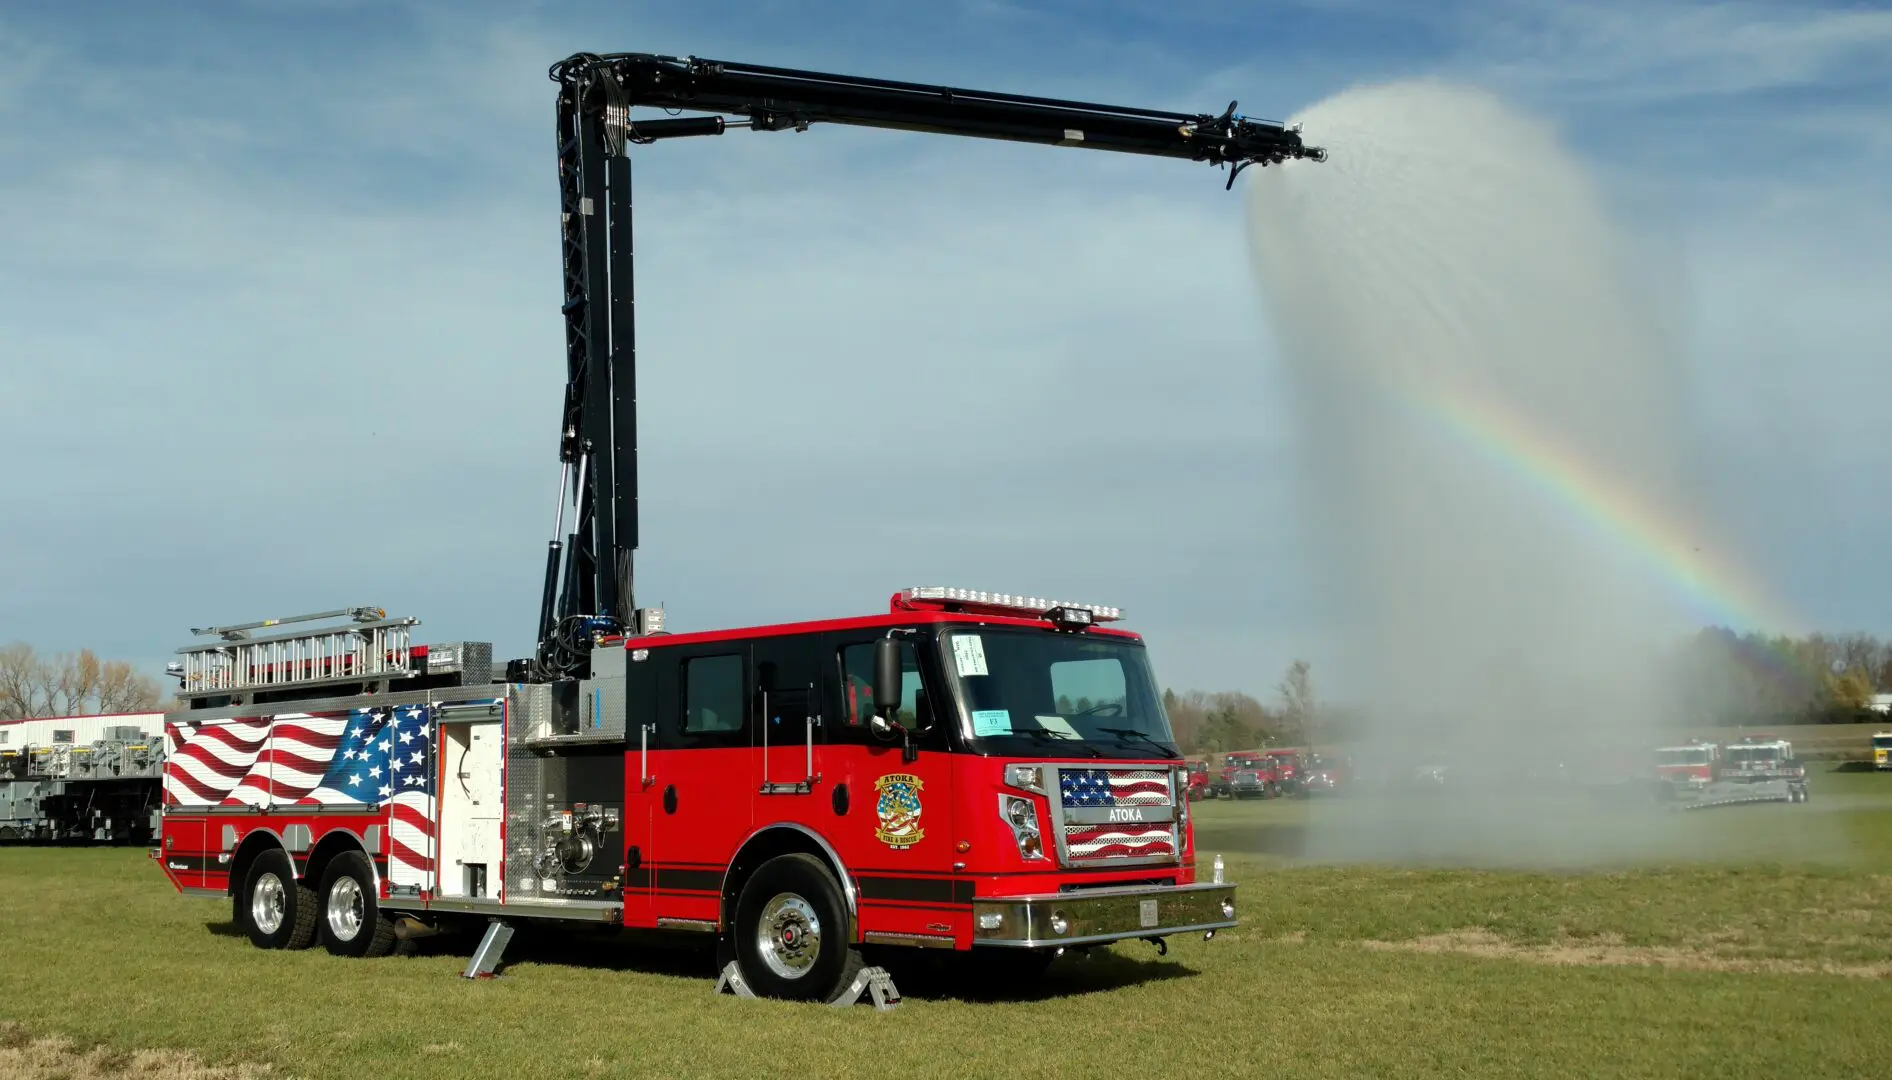 A Fire Truck With a Jet of Spraying Water at a Side